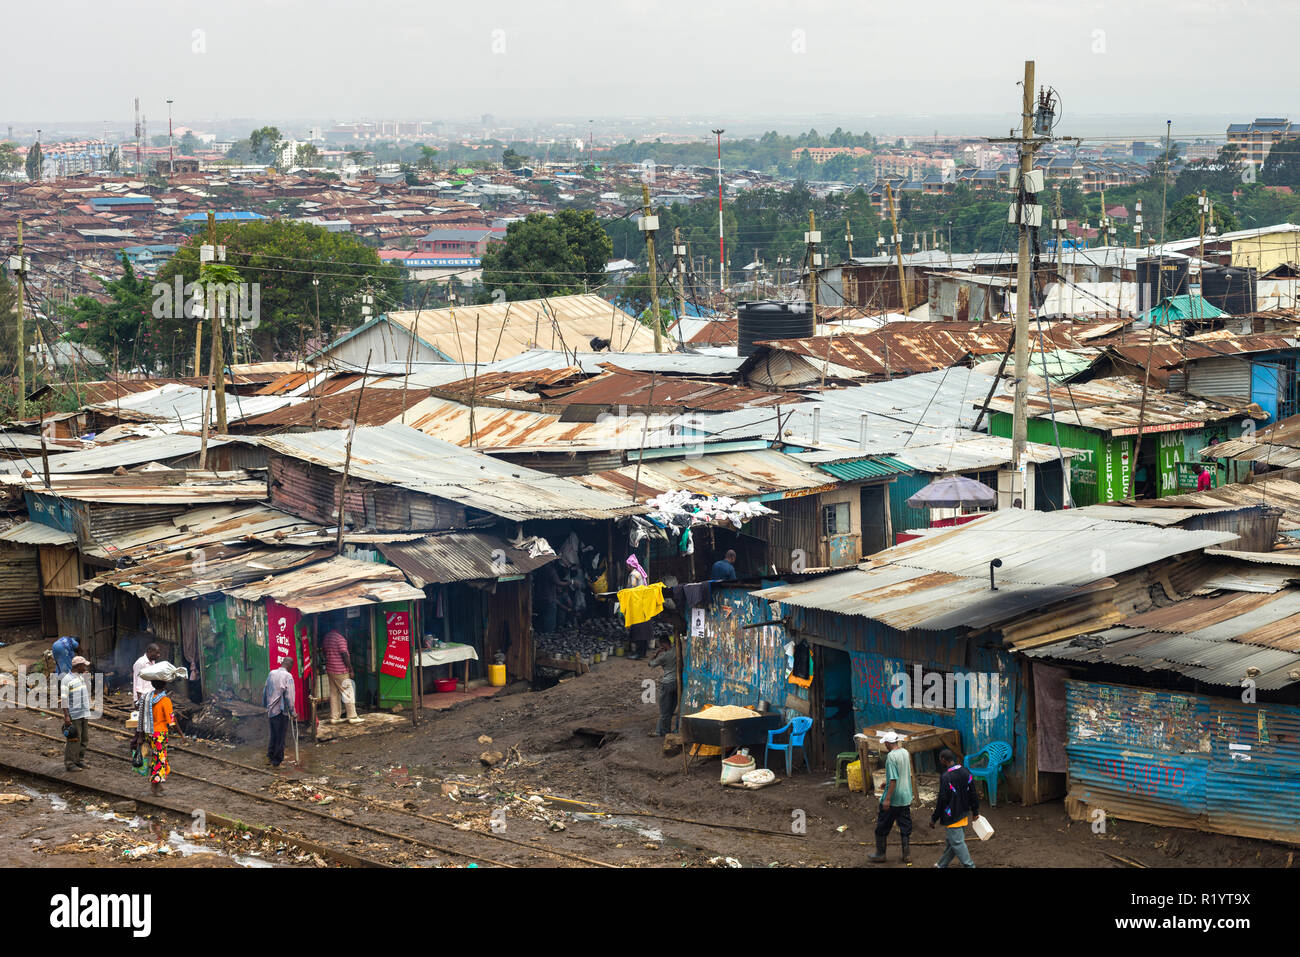 View of a section of Kibera slum showing makeshift shack housing and residents going about daily life, Nairobi, Kenya Stock Photo